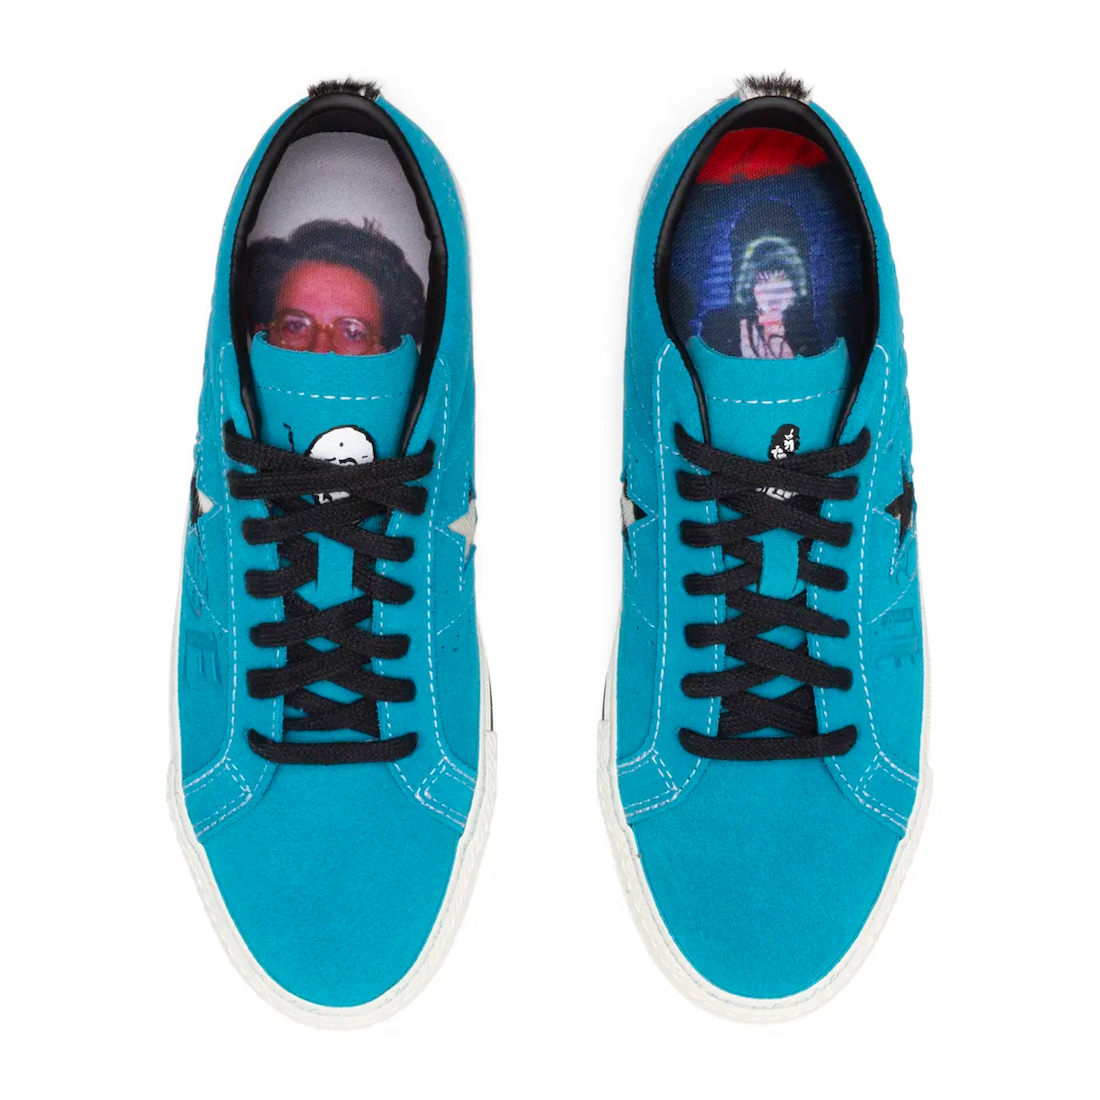 Sean Pablo Converse One Star Pro Ox Rapid Teal 73215C Release Date